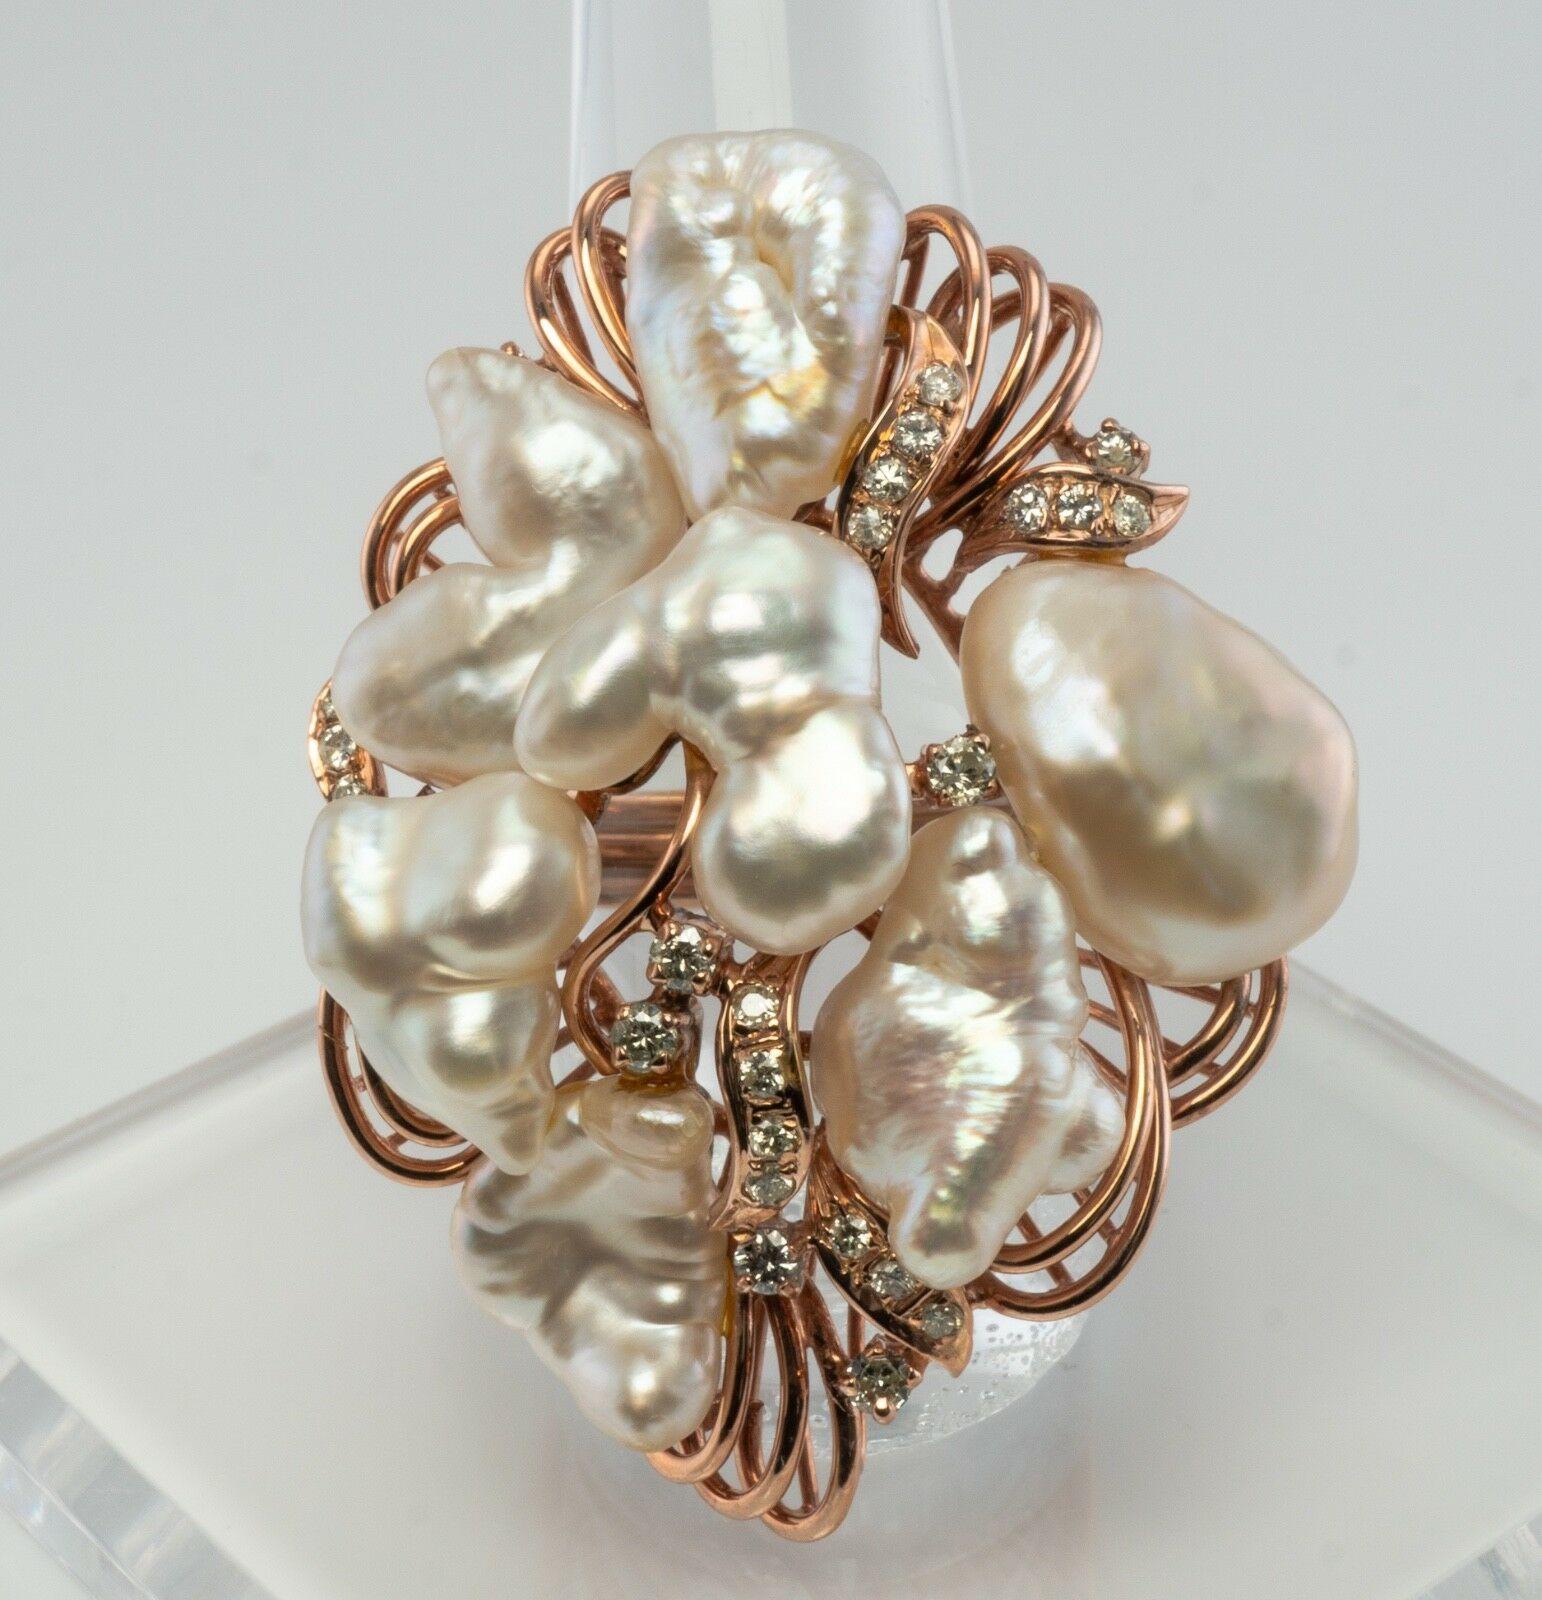 Absolutely stunning Vintage Ring, Baroque Pearl Ring, Diamond Ring, 14K Rose Gold Ring, Cocktail Ring. Set with genuine cultured baroque Pearls and diamonds. There are seven free form pearls of a great luster! Twenty four round brilliant cut